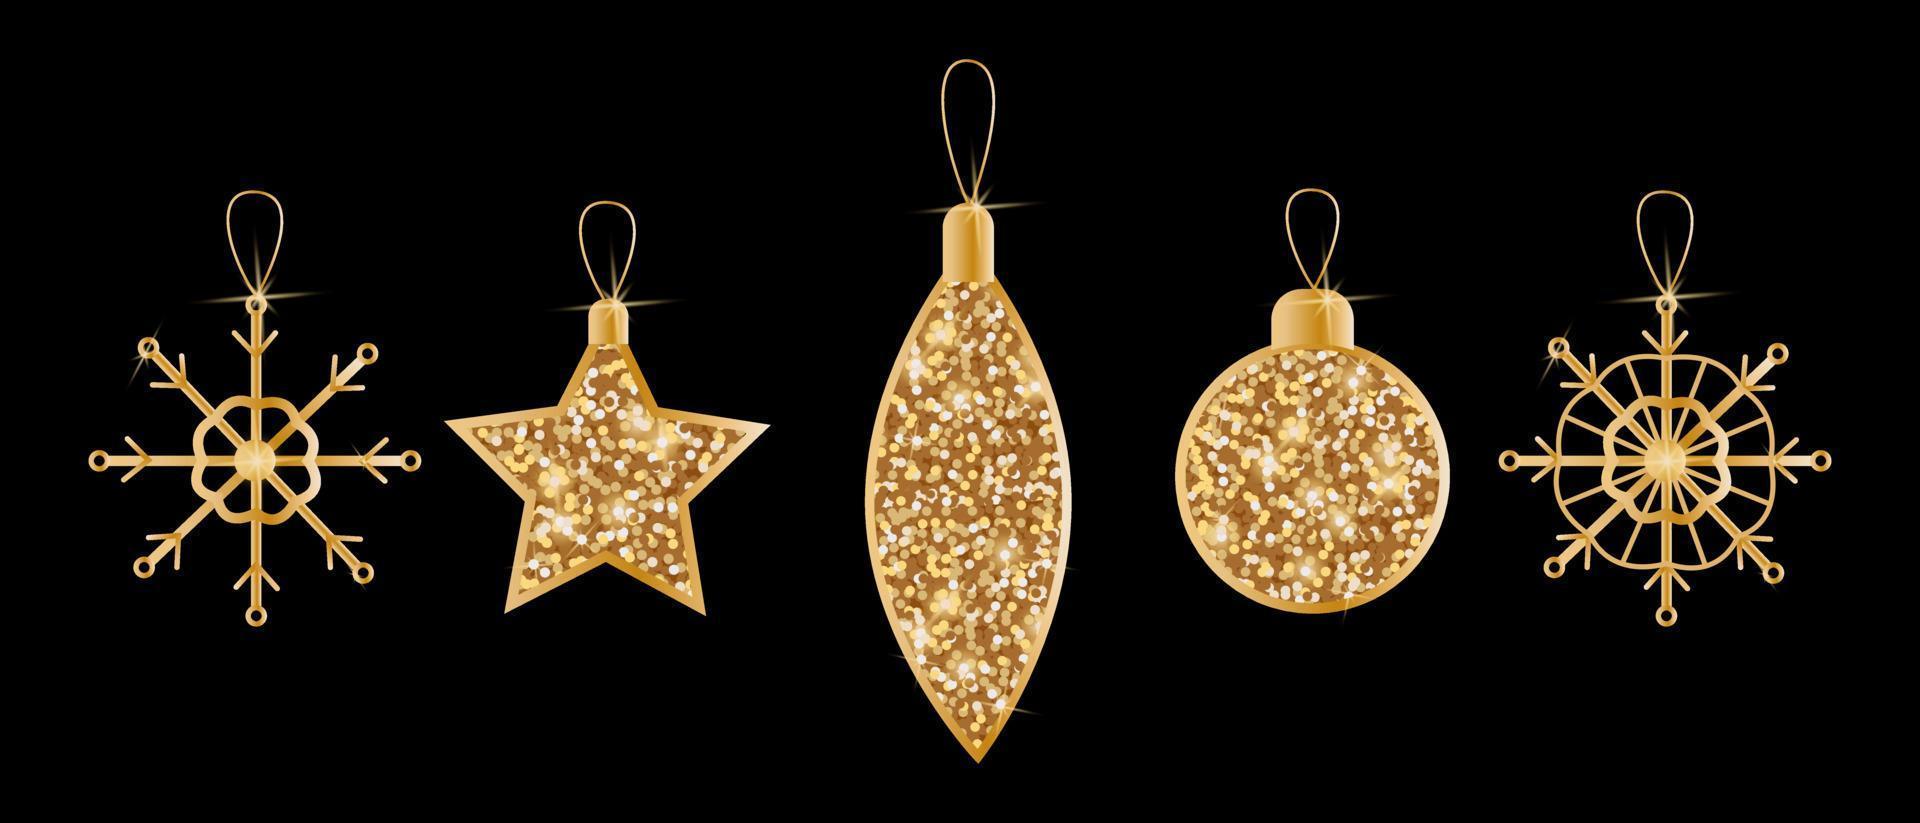 Christmas toys with sequins and glitter. Set of Christmas decorations. Vector golden objects on a black background.